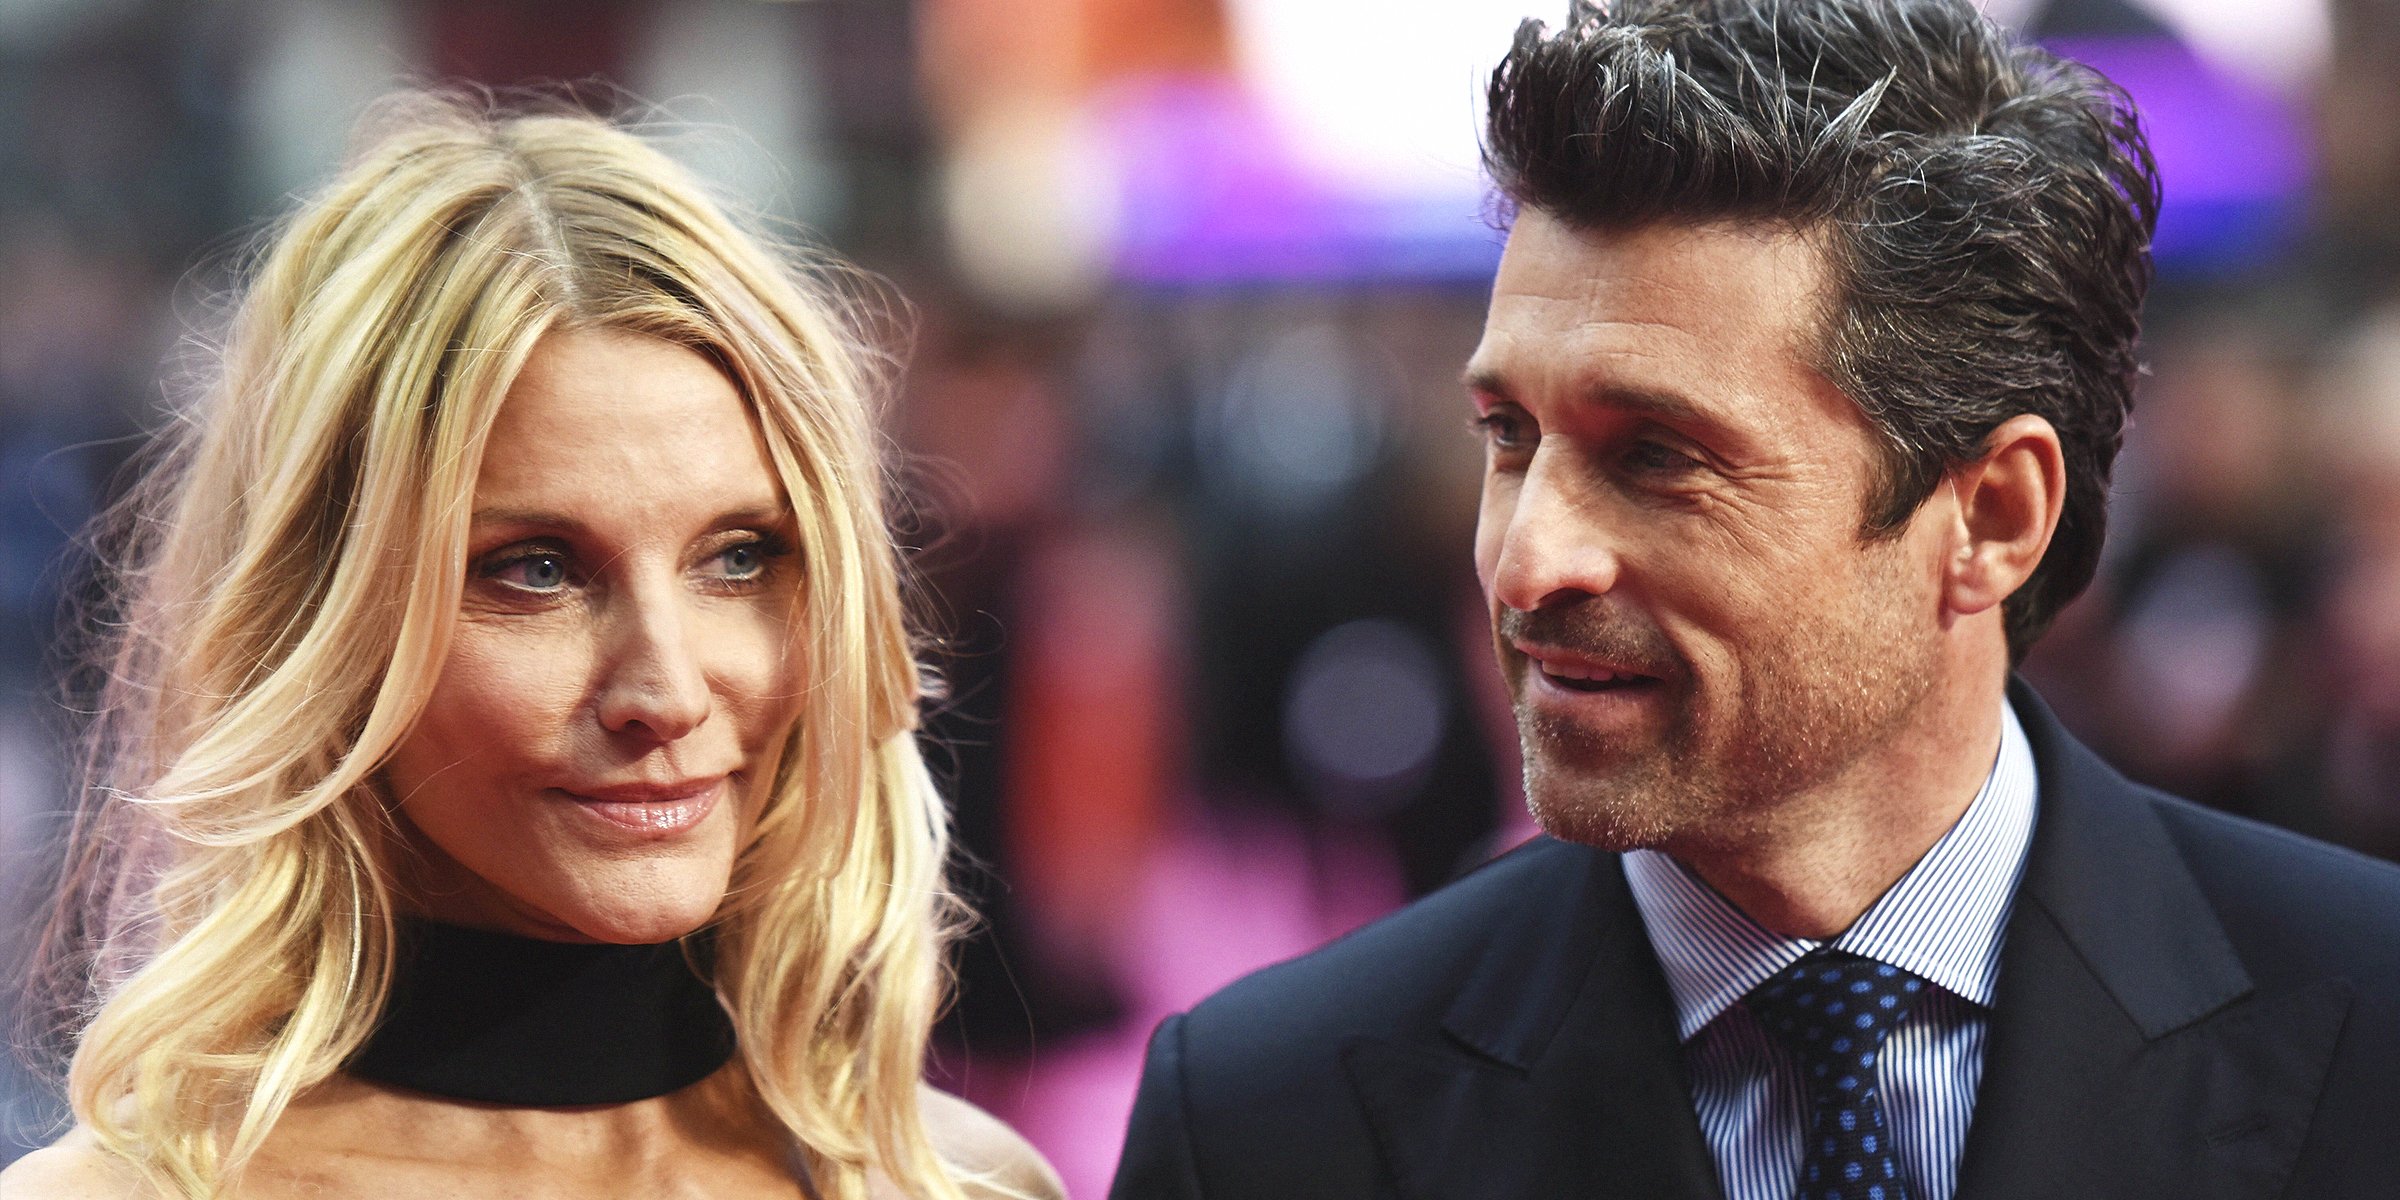 Jillian Fink and Patrick Dempsey ┃Source: Getty Images